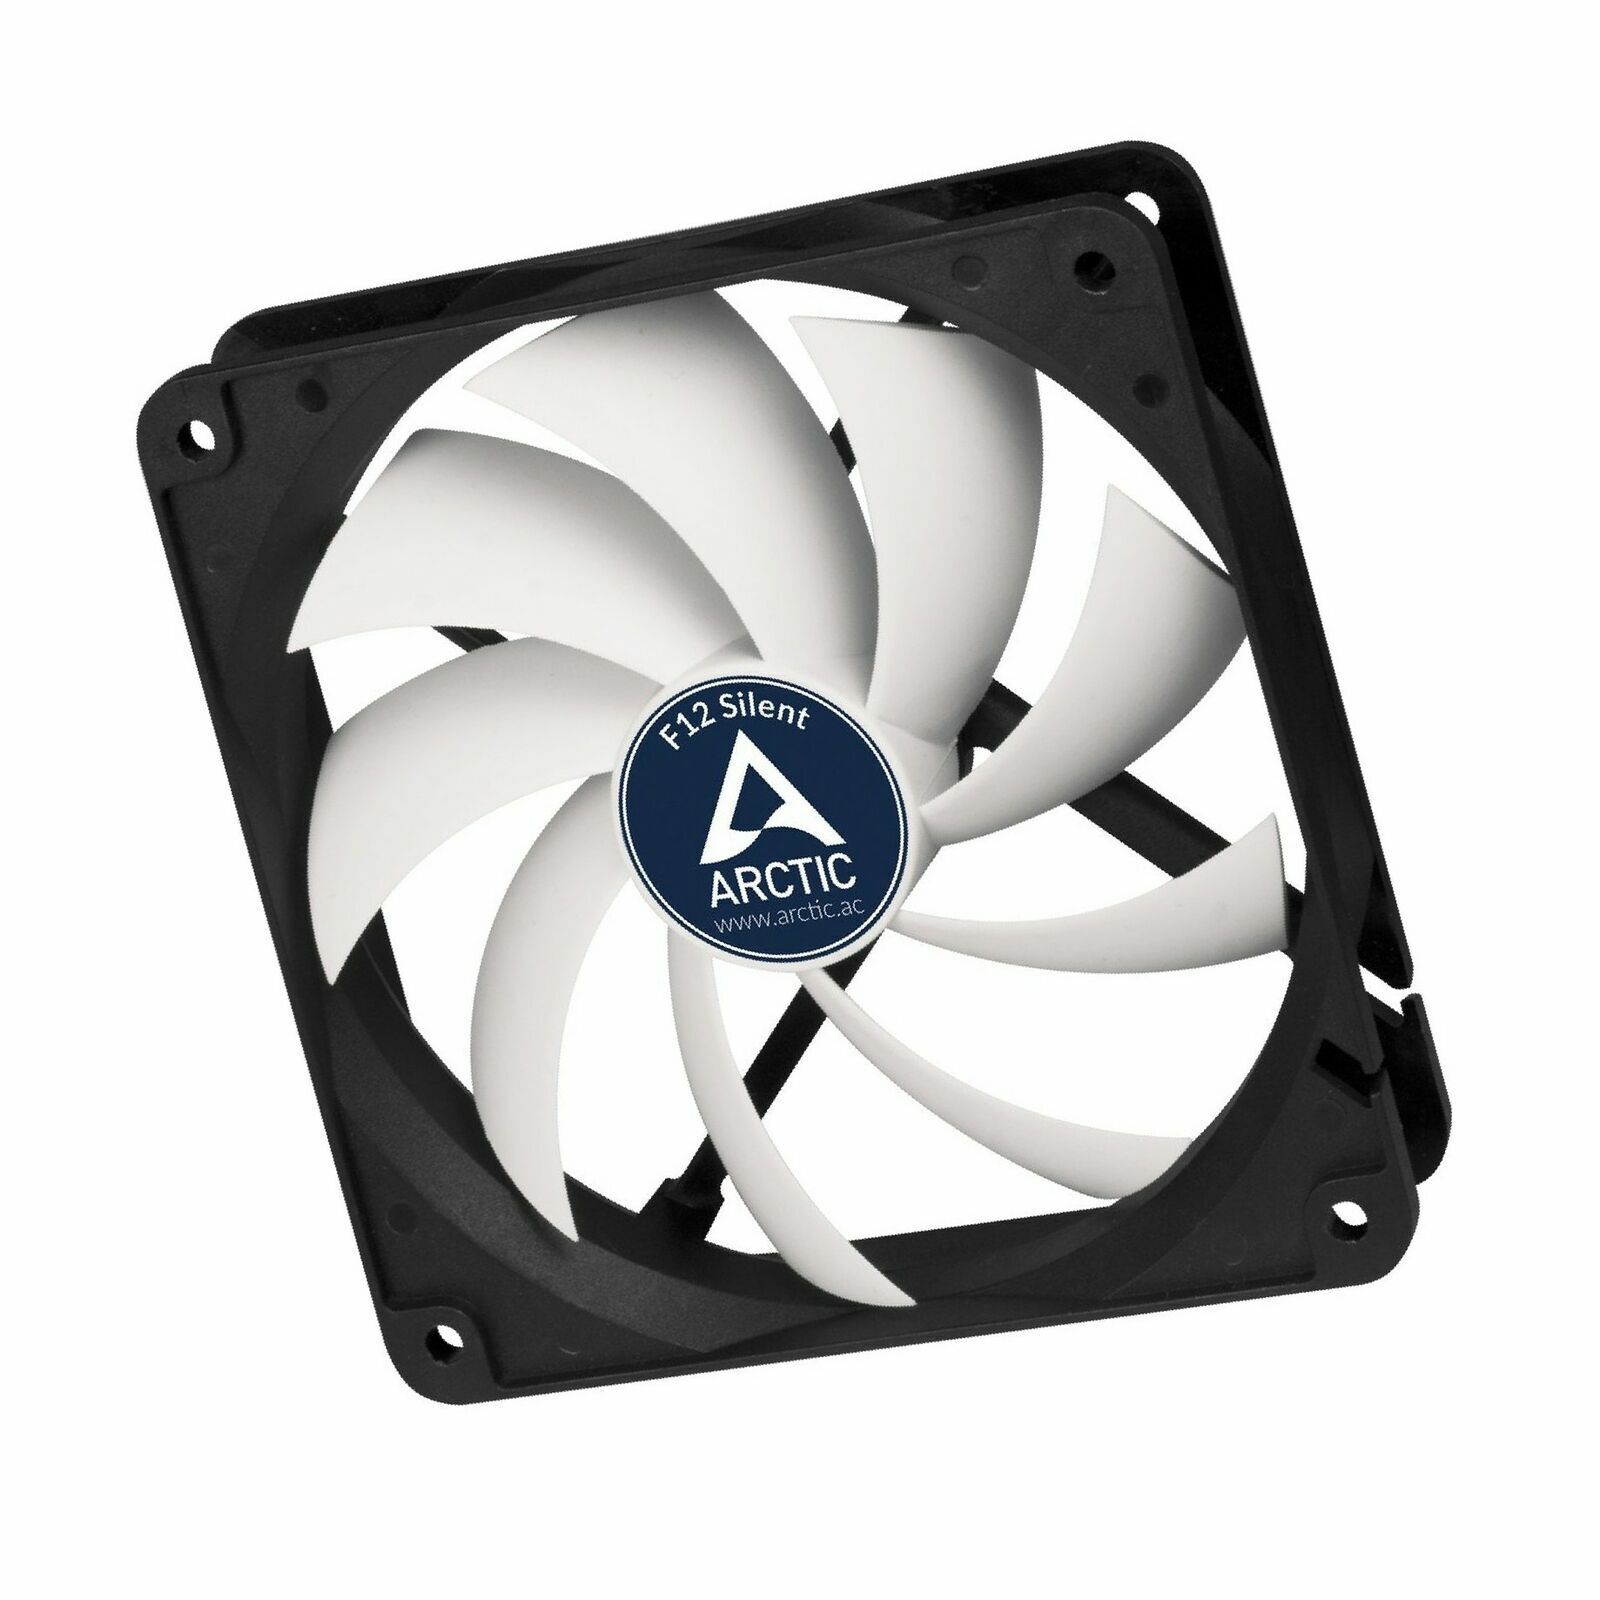 ARCTIC F12 Silent, 120 mm 3-Pin Fan with Standard Case and Higher Airflow, Quiet